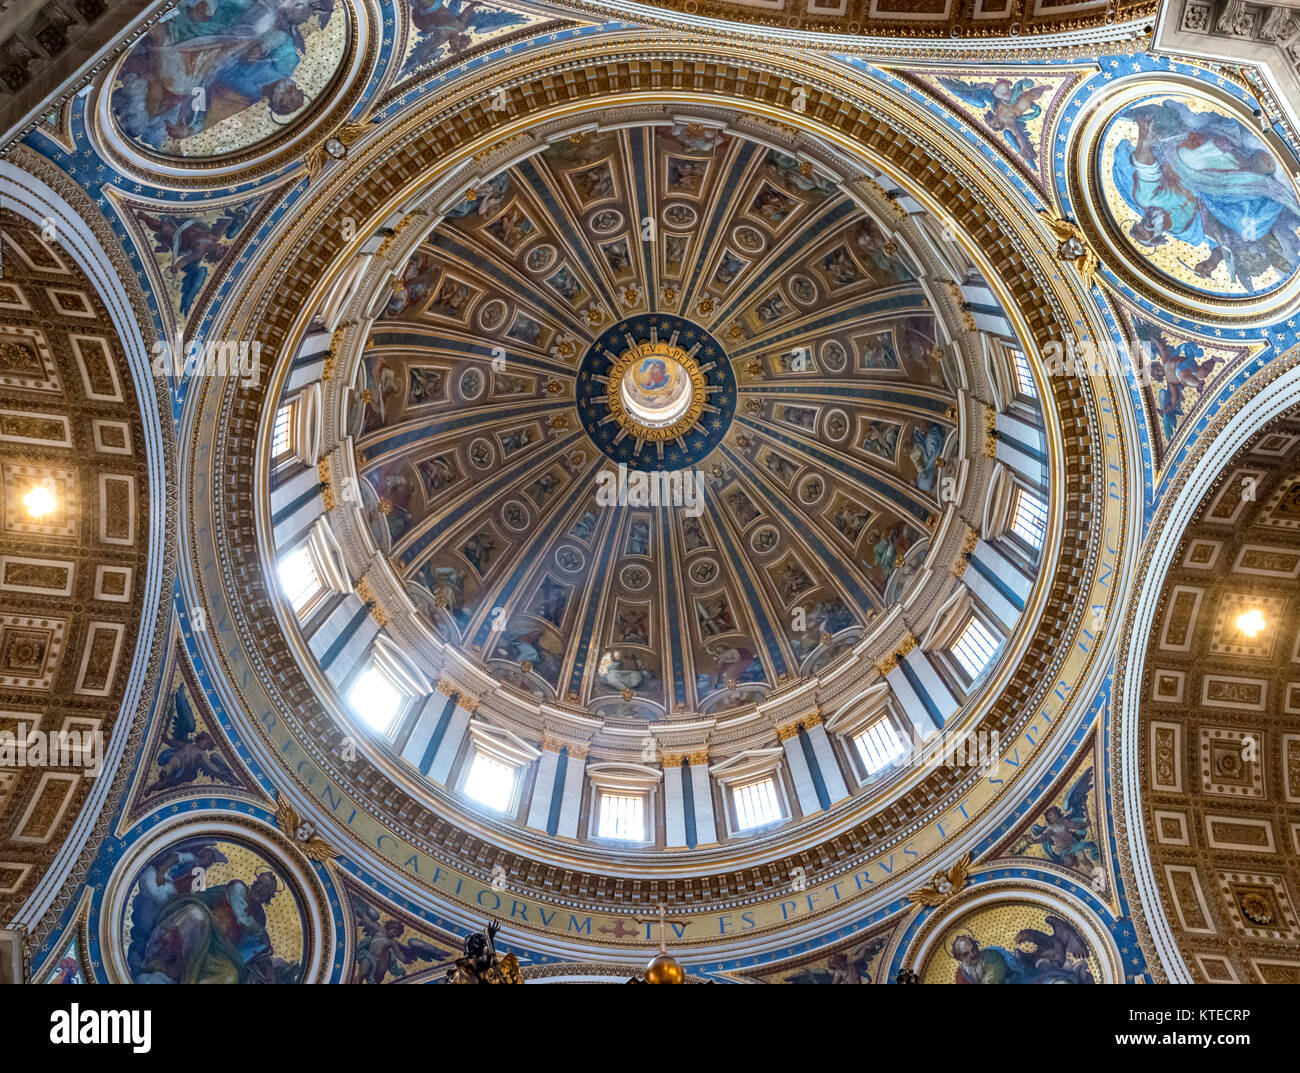 Interior of the dome of St Peter's Basilica, Vatican City, Rome, Italy Stock Photo